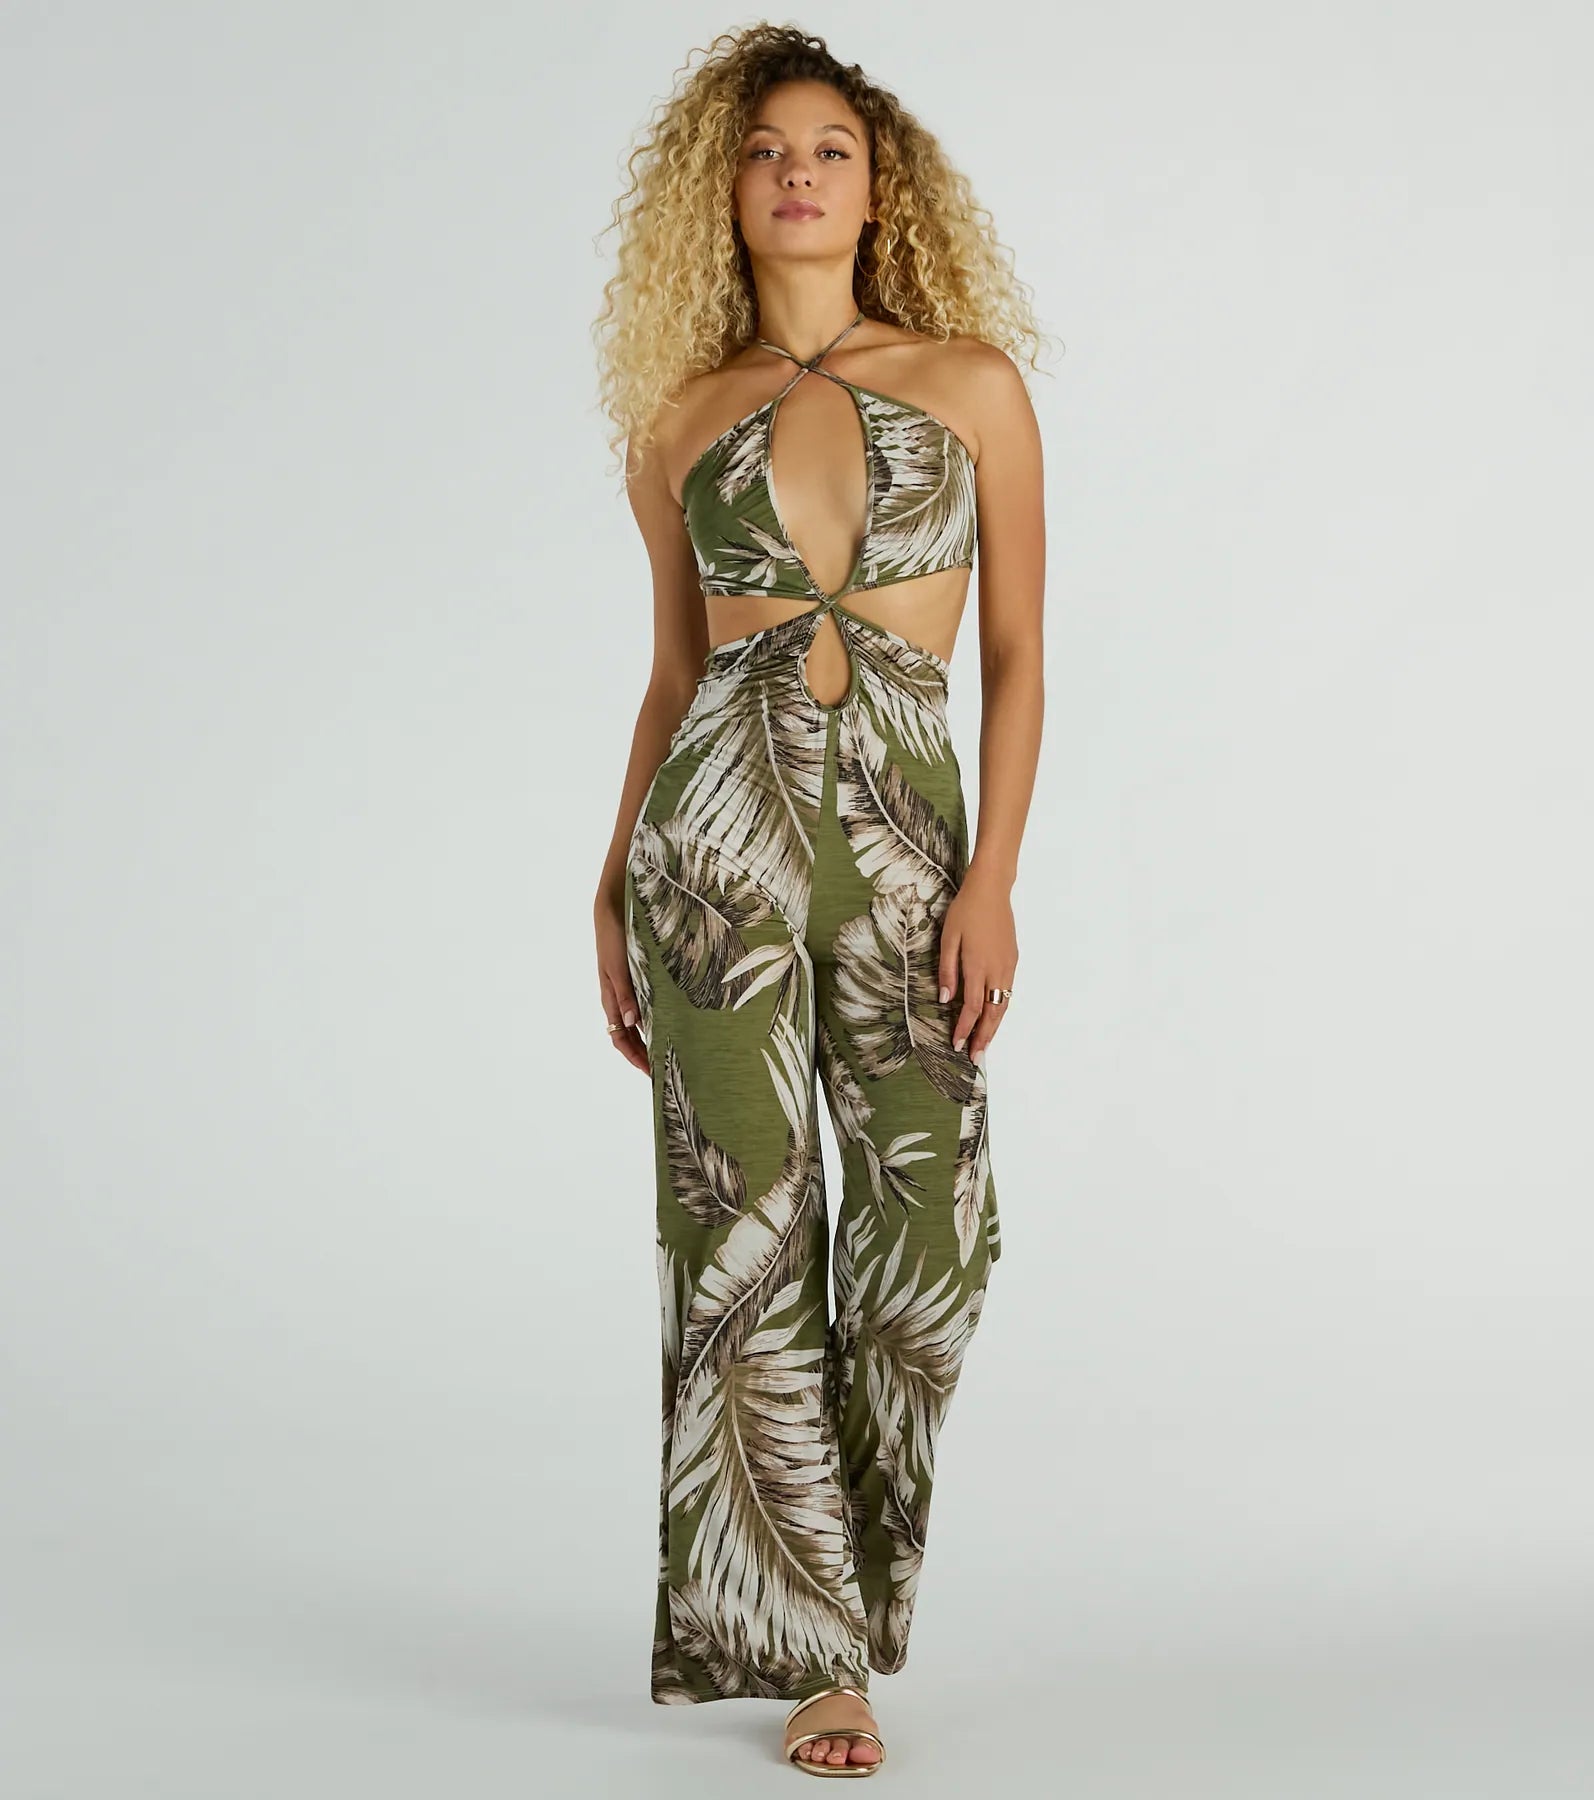 Sexy Halter Plunging Neck Sleeveless Spaghetti Strap Tropical Print Knit Stretchy Cutout Open-Back Jumpsuit